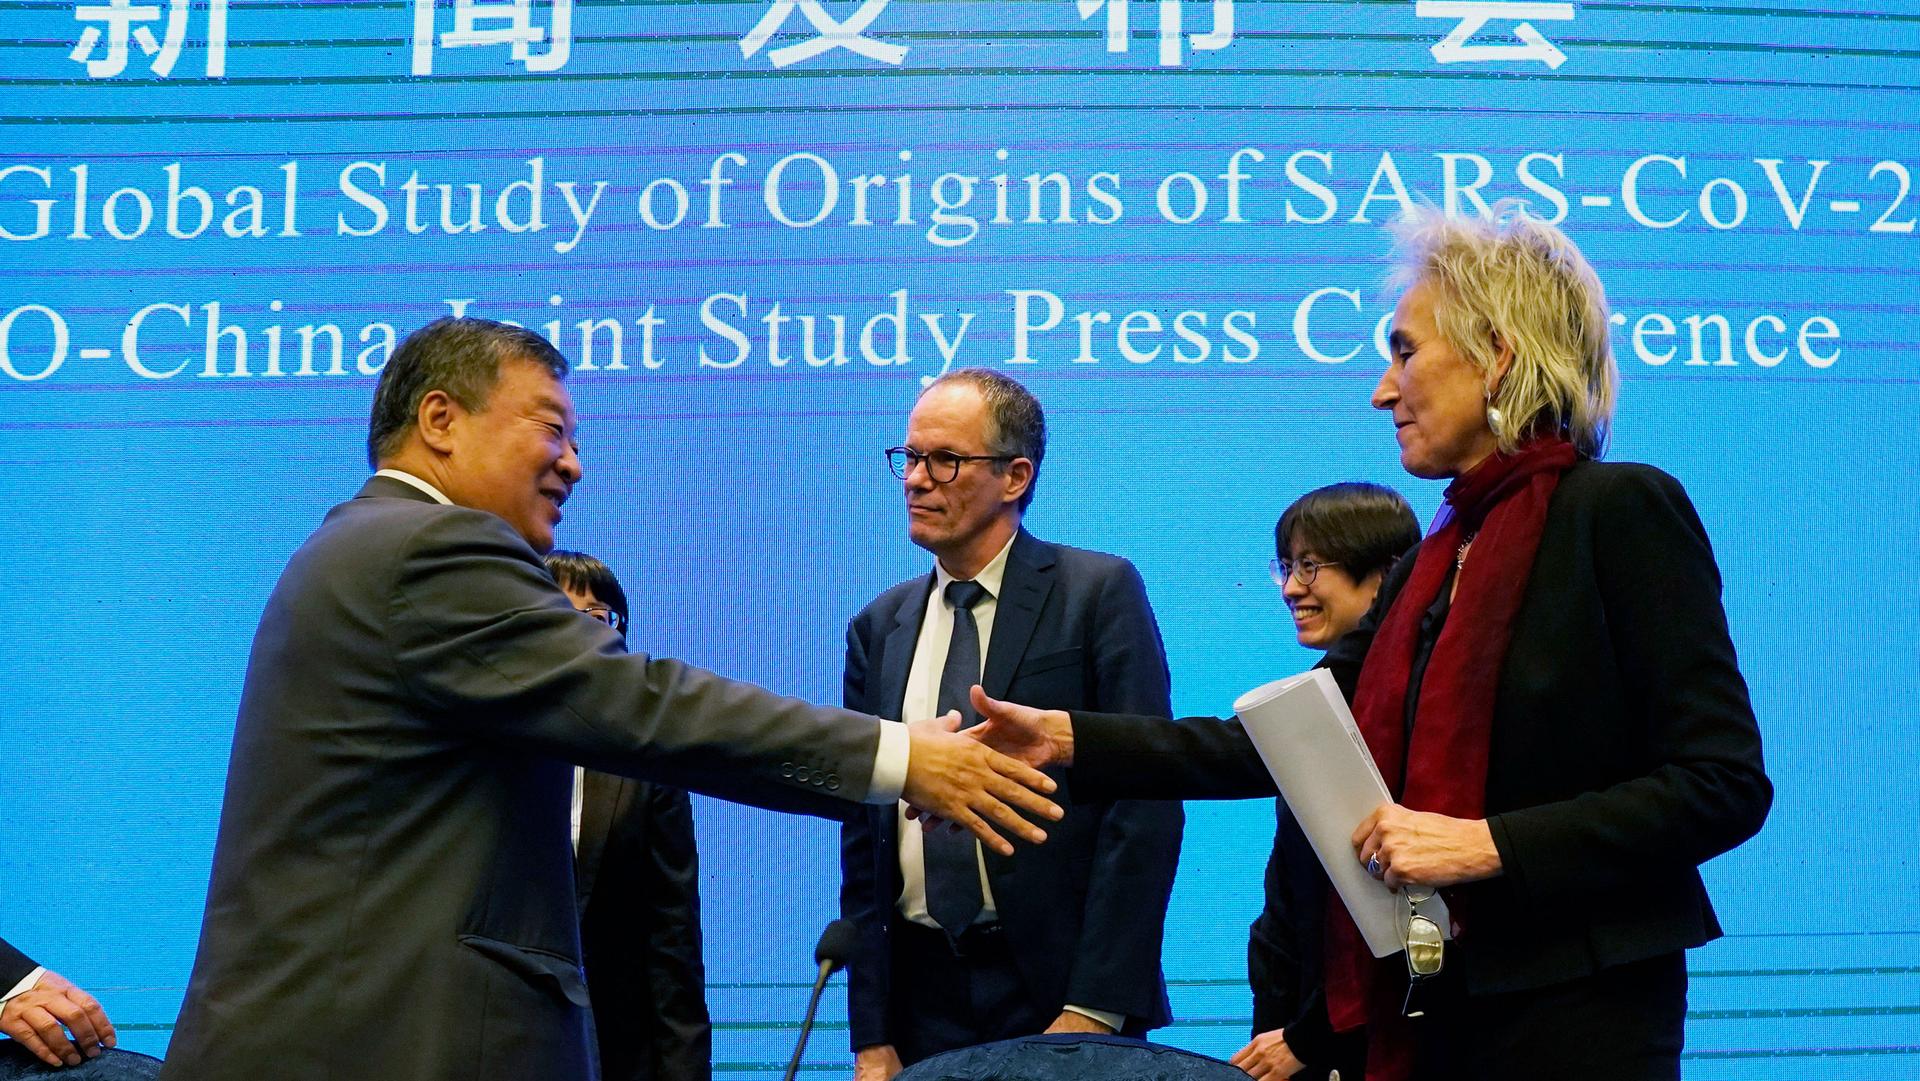 Marion Koopmans (R)is shown holding a folded white paper and reaching out to shake the hand of Liang Wannian.